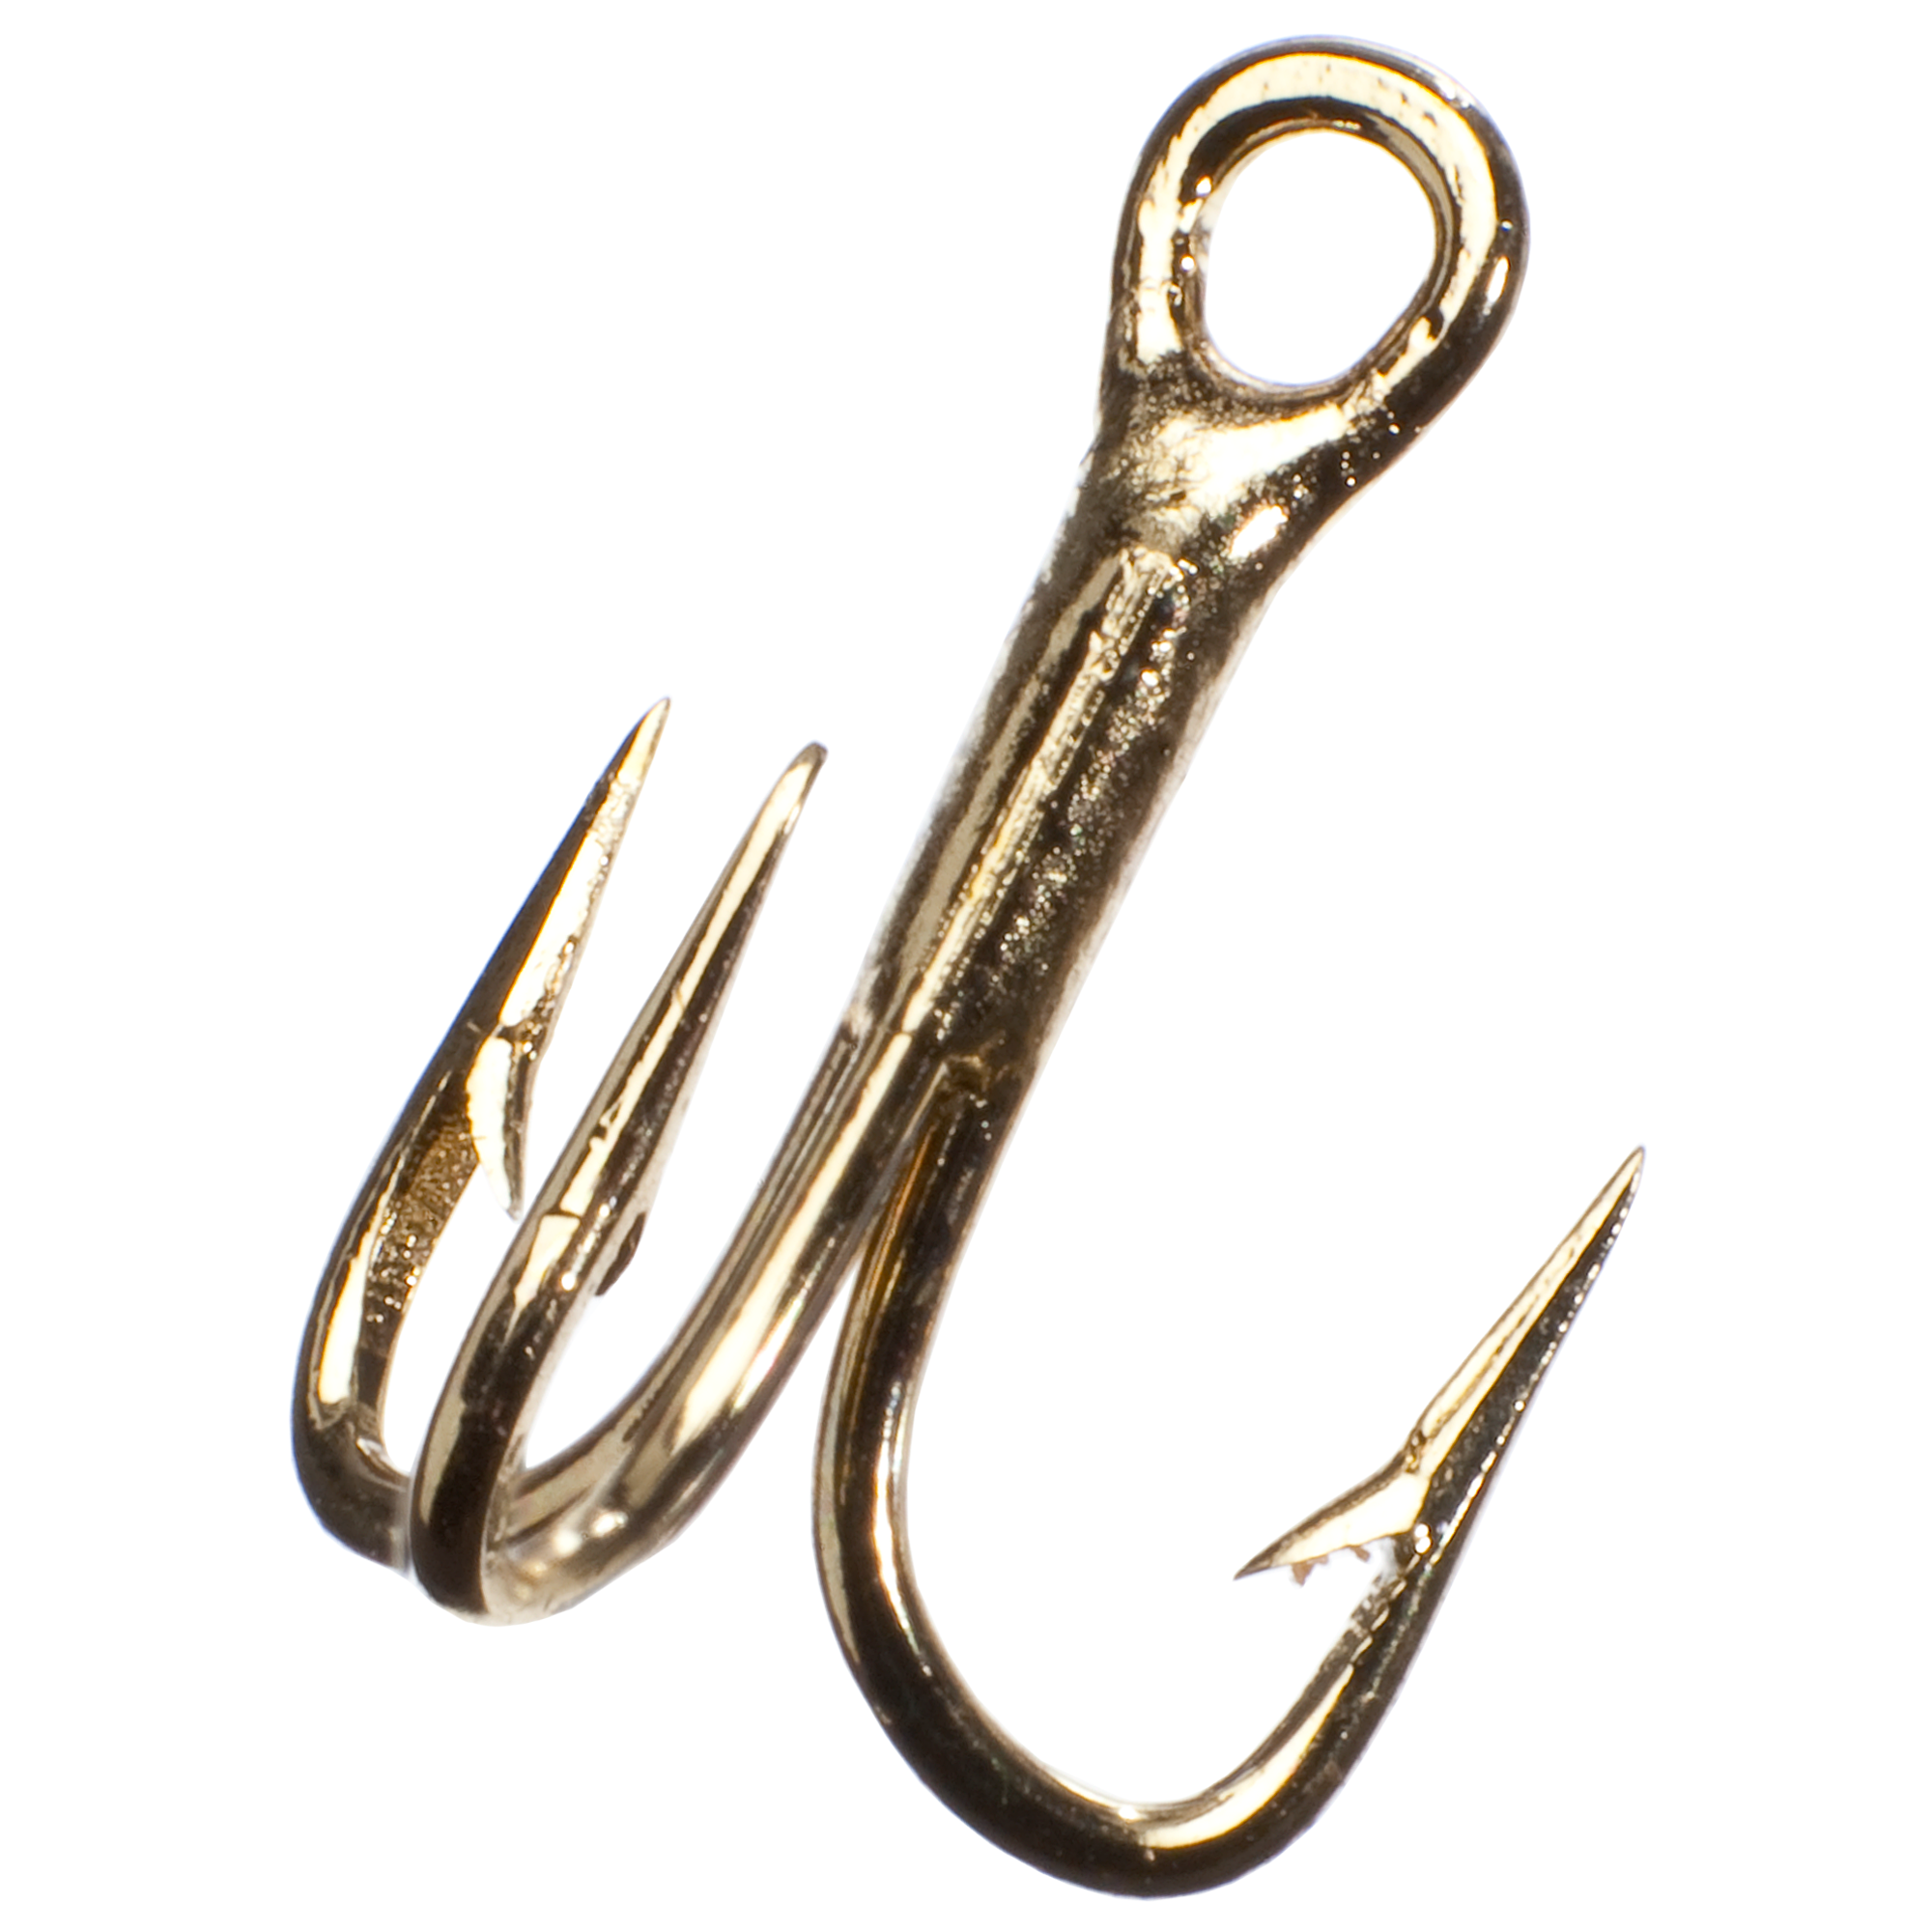 Eagle Claw 2X Treble Hooks - Gold - #12 - 5 Pack